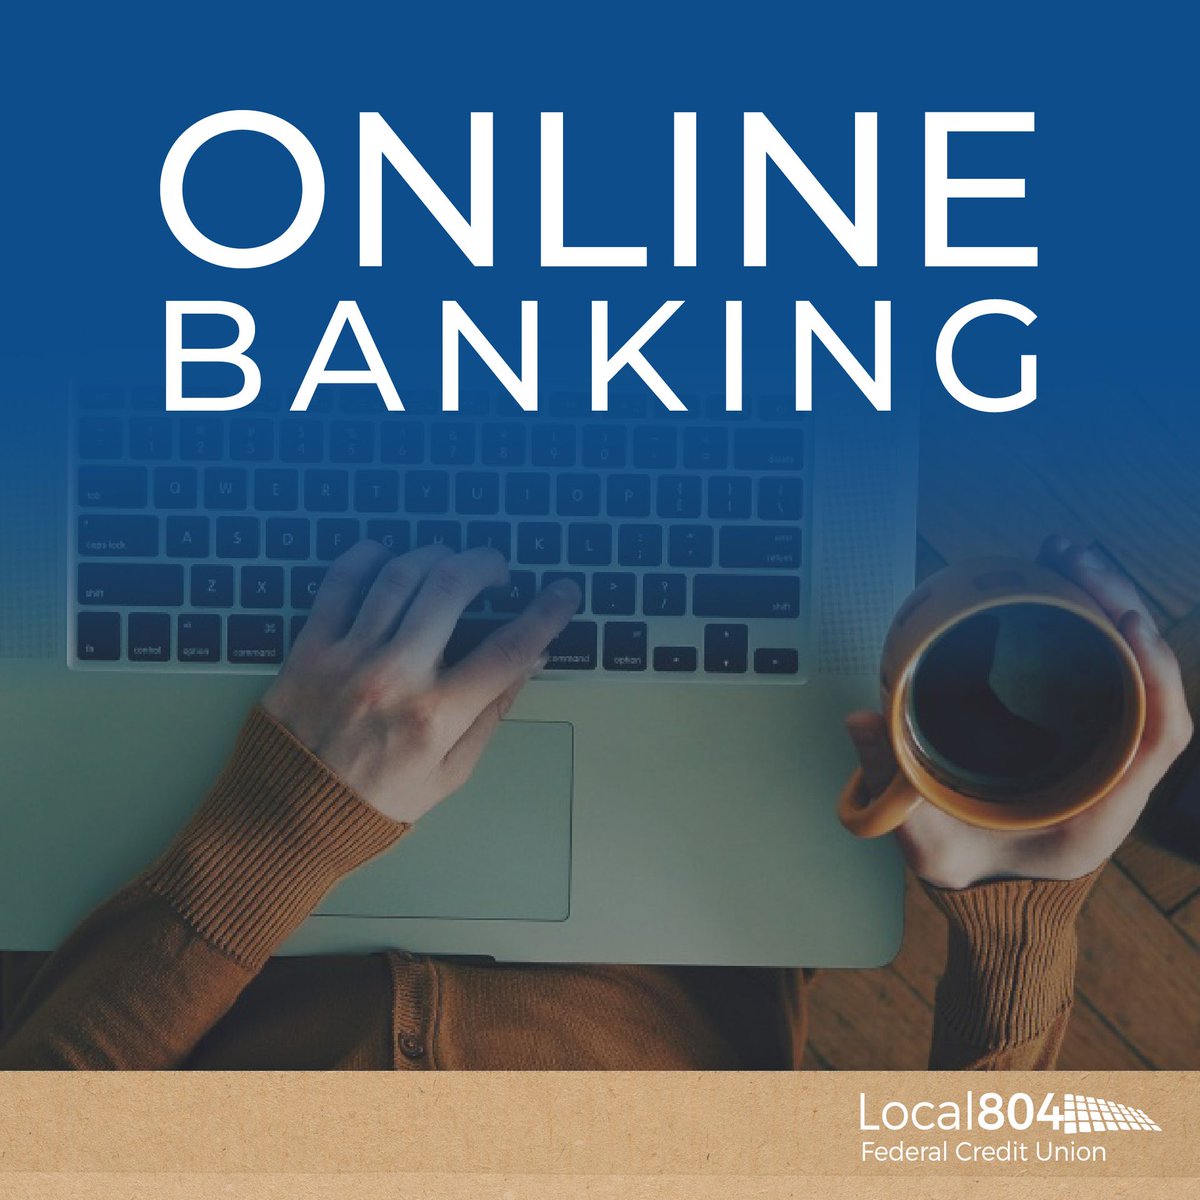 Enjoy 24/7 access to your finances with Local 804 FCU Online Banking. bit.ly/3UrSGhT

#TeamstersLocal804 #Teamsters #UPS #local447IAMAW @Teamsters_Local_804 @804_Local